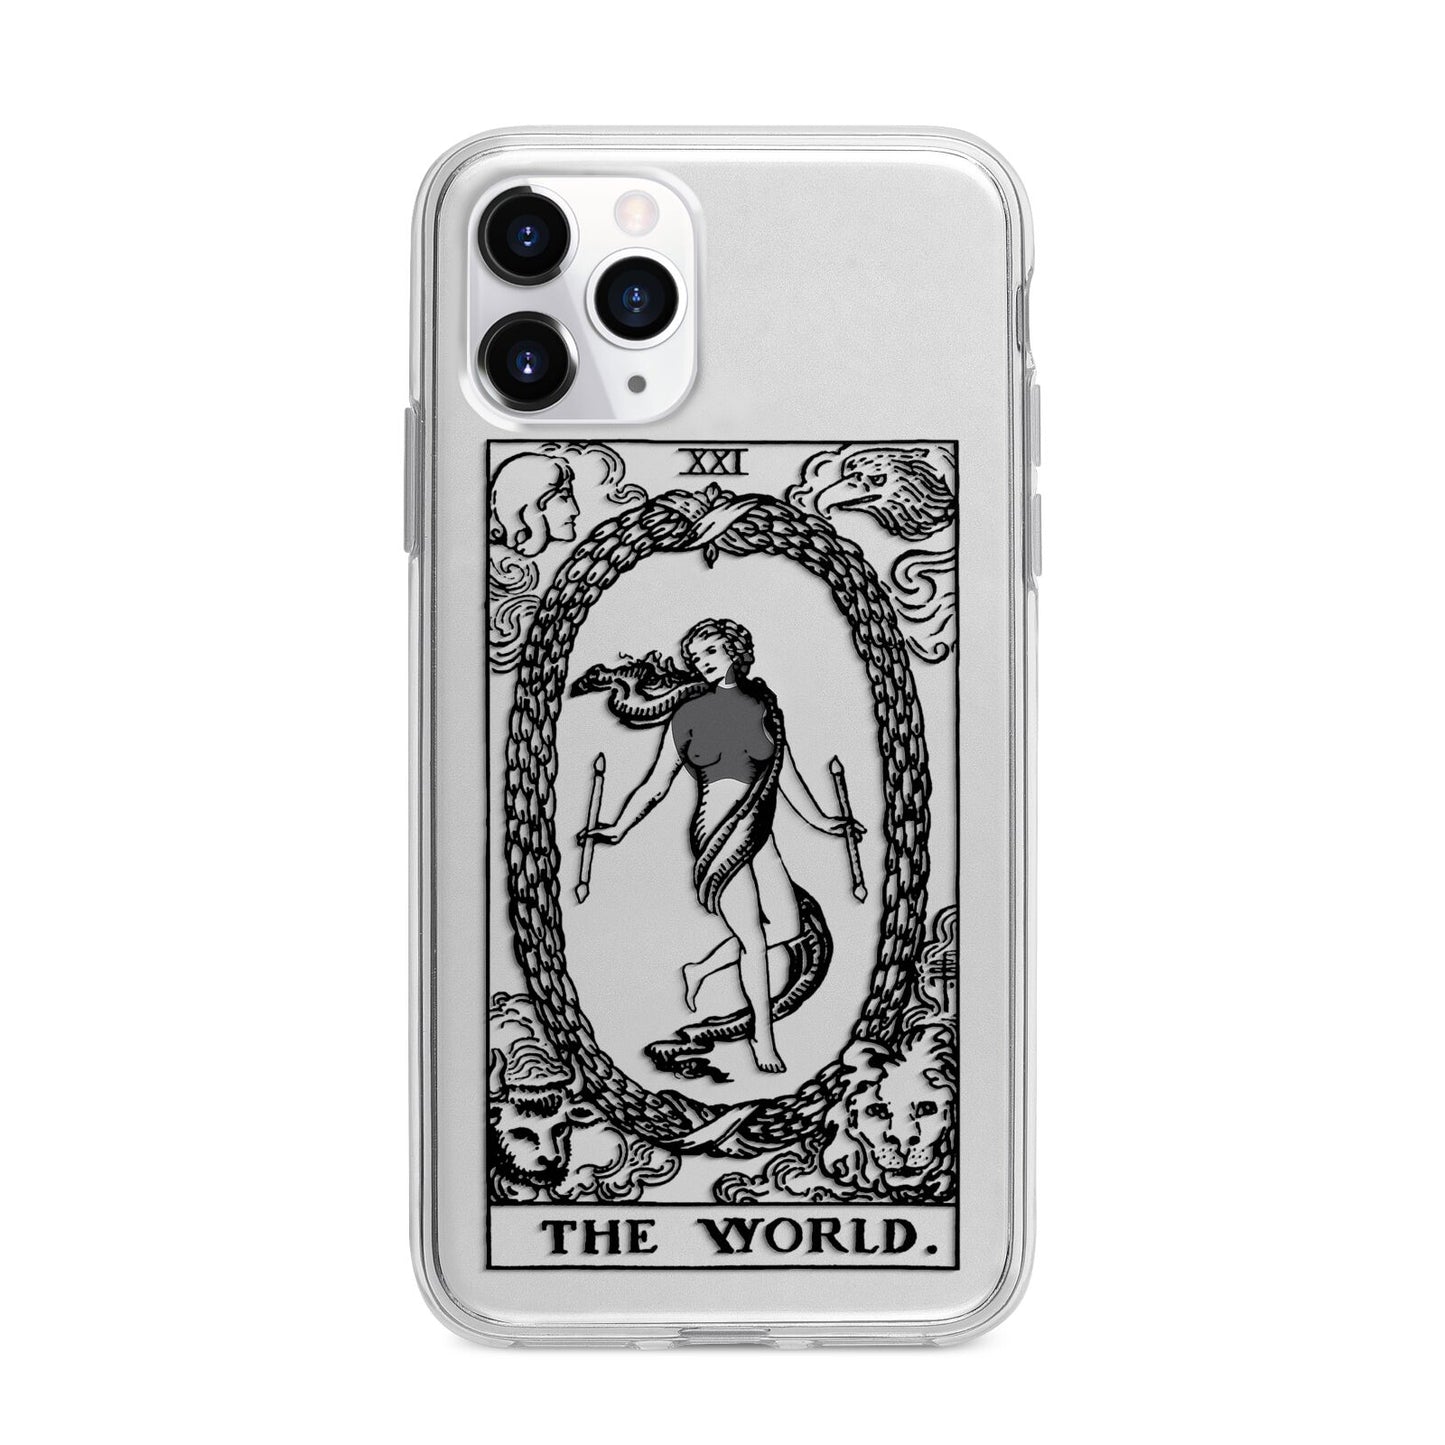 The World Monochrome Apple iPhone 11 Pro Max in Silver with Bumper Case